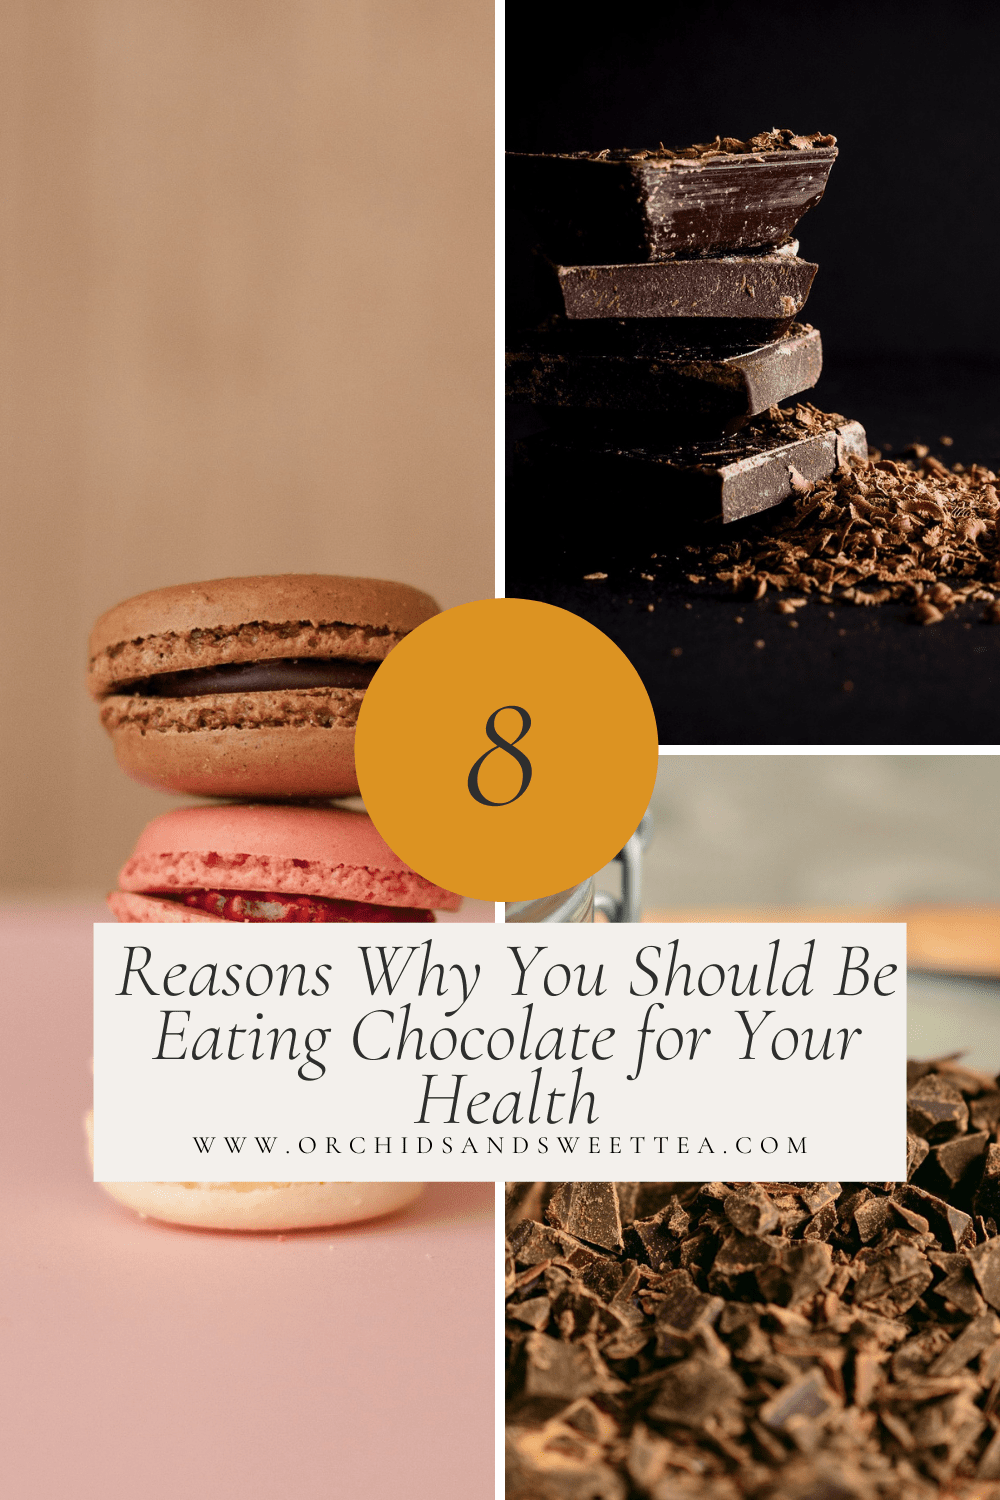 8 Reasons Why You Should Be Eating Chocolate for Your Health